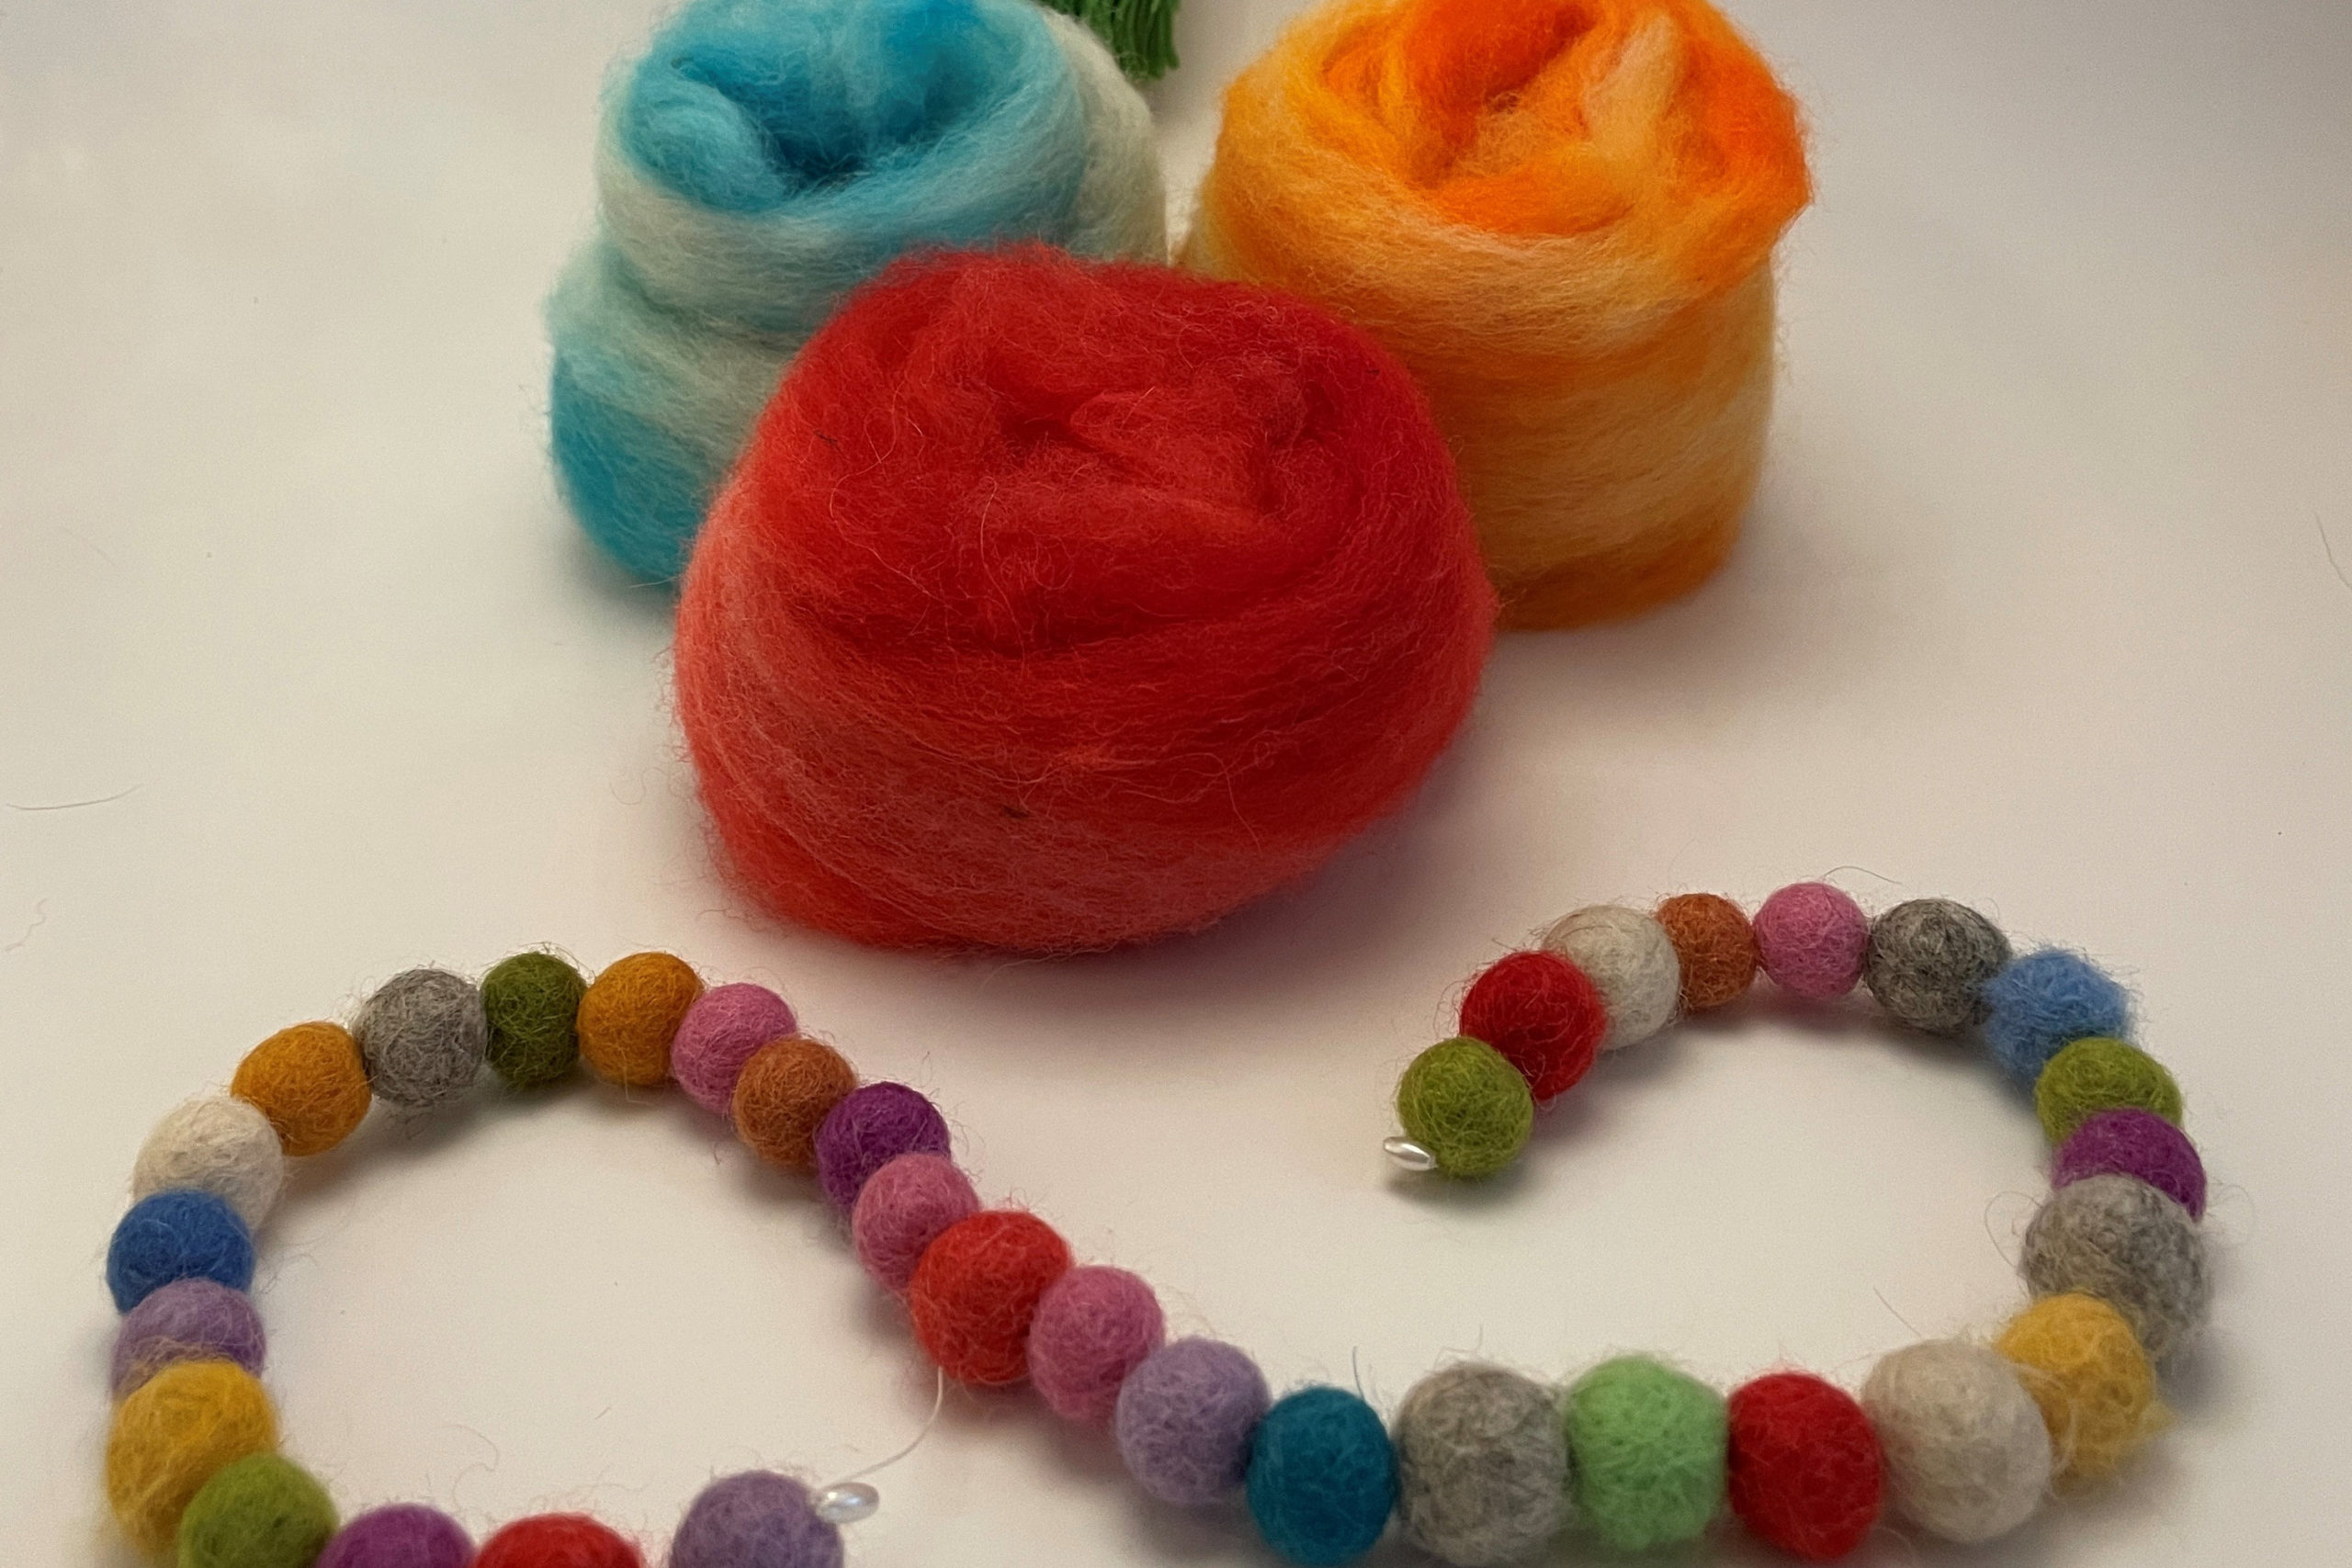 Three felt balls blue, red, and orange with a string of smaller felt balls in front, multicolored